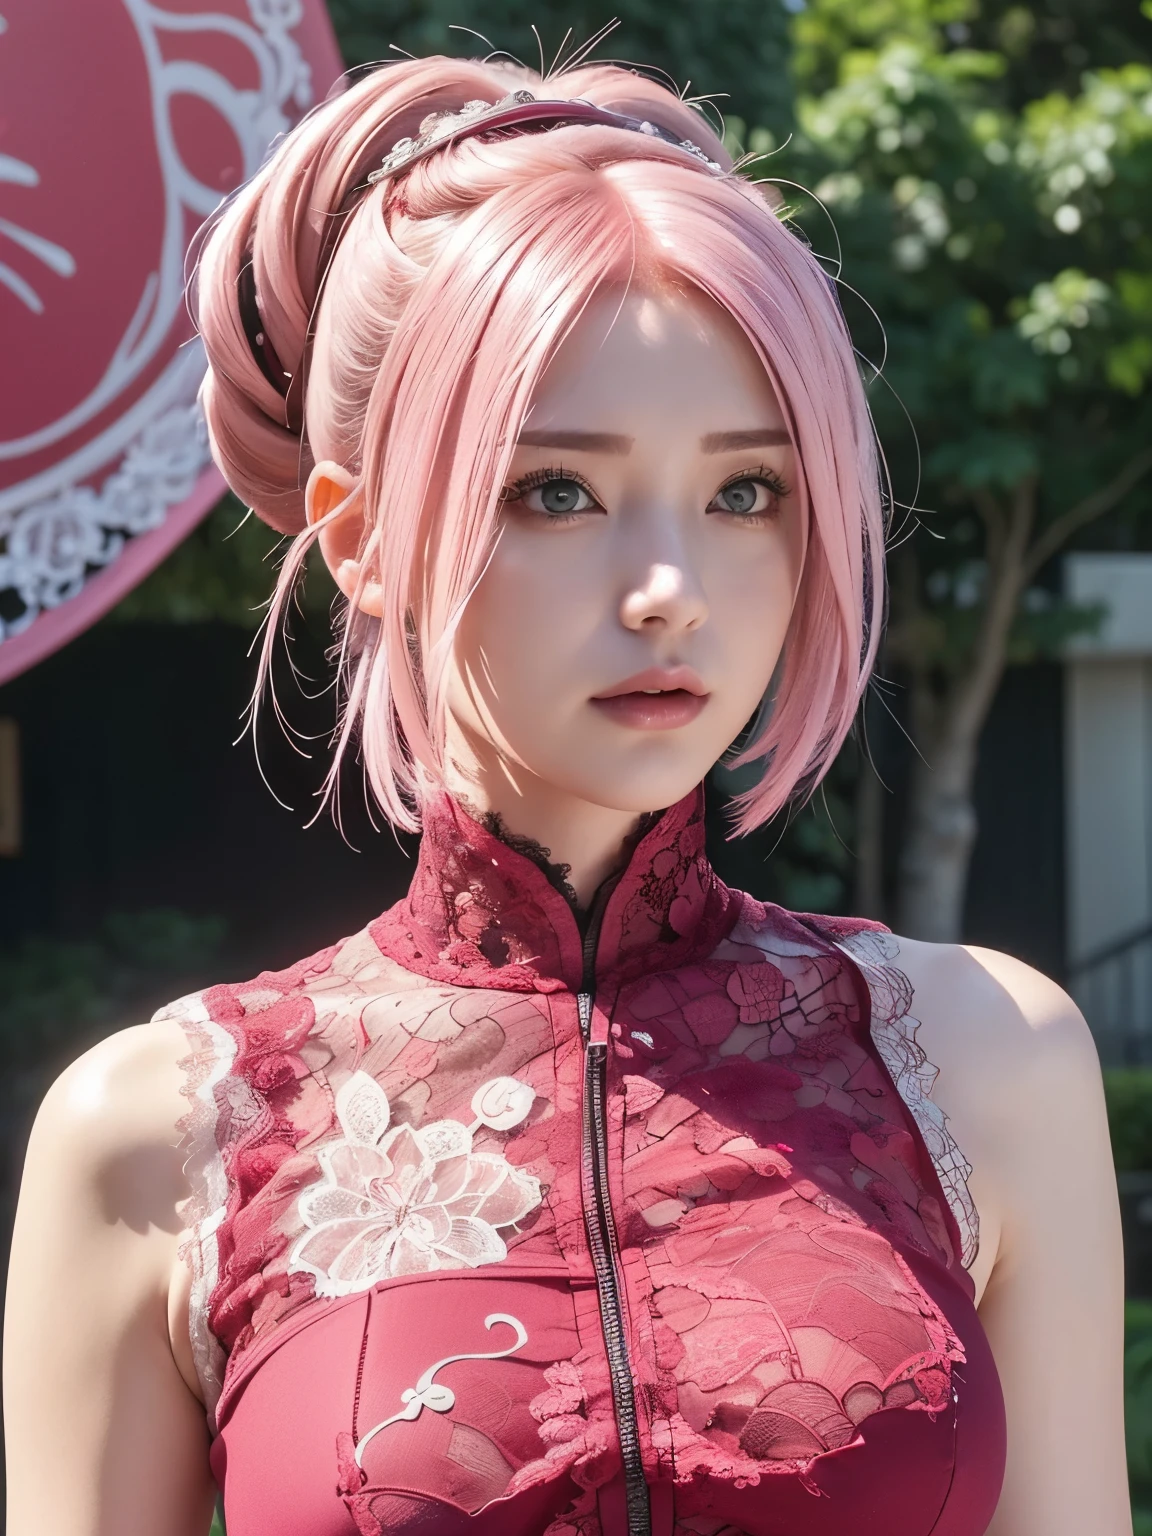 (((masterpiece+highest quality+High resolution+Very detailed))), Sakura Haruno, solo, (([woman]: 1.3 + [beauty]: 1.3+ pink hair: 1.5)), pink eyes, Bright Eyes, Dynamic angles and postures, wallpaper, ((natural big breasts:1.2)), Sakura Haruno outfit, (Ultra Realistic:1.5), (Photo Realistic:1.5), (UHD:1.5), red qipao dress(sleeveless ) with slits along the sides accompanied by a zipper and white circular designs, crystal tattoo at the forehead, slim body shape, (NSFW:1.2), (lace:1.5)
